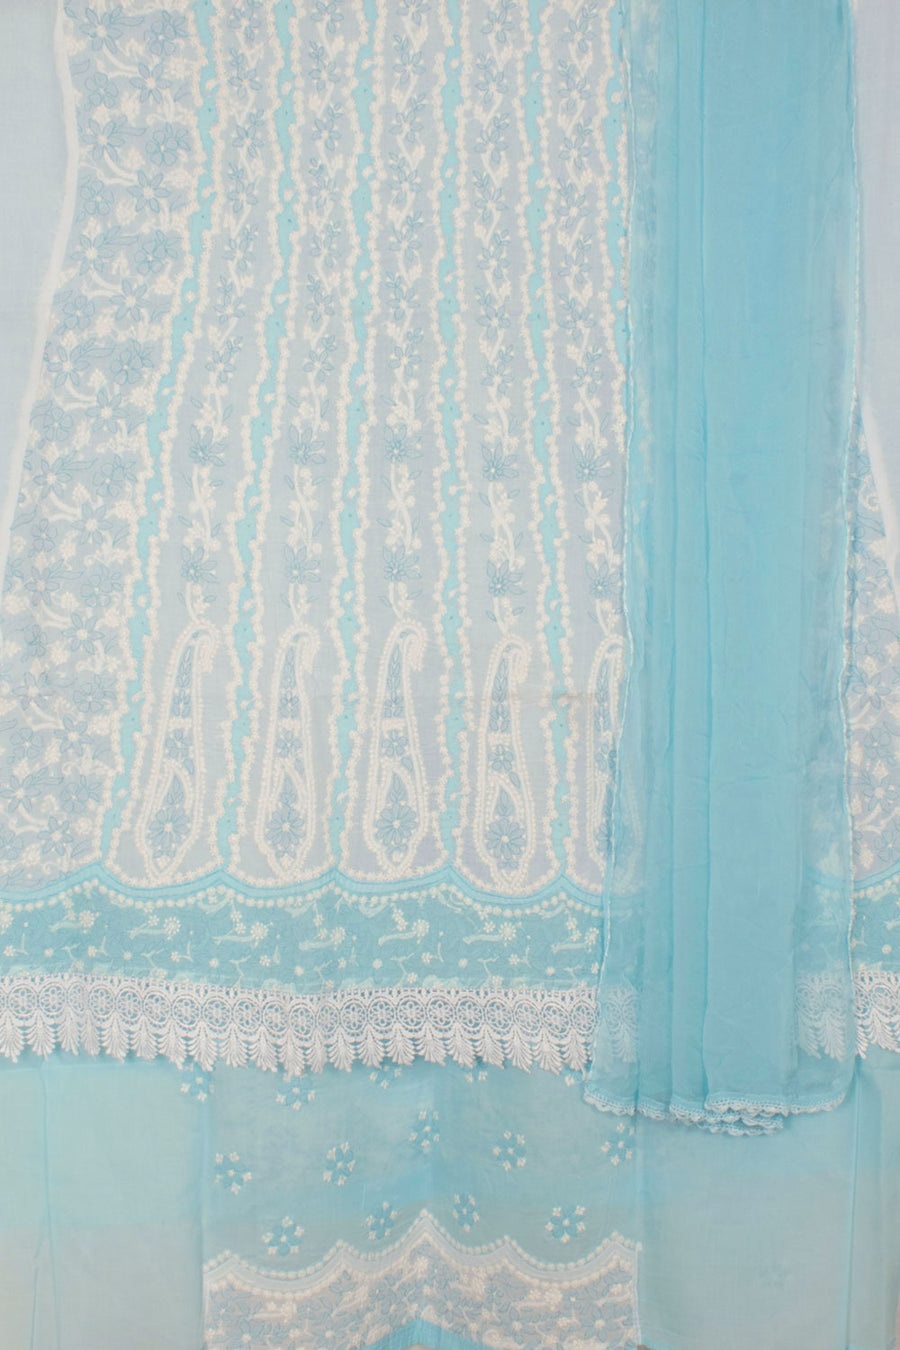 Hand Embroidered Chikankari Cotton 3-Piece Anarkali Suit Material with Daraz, Lace Work and Chiffon Crochet Border Dupatta